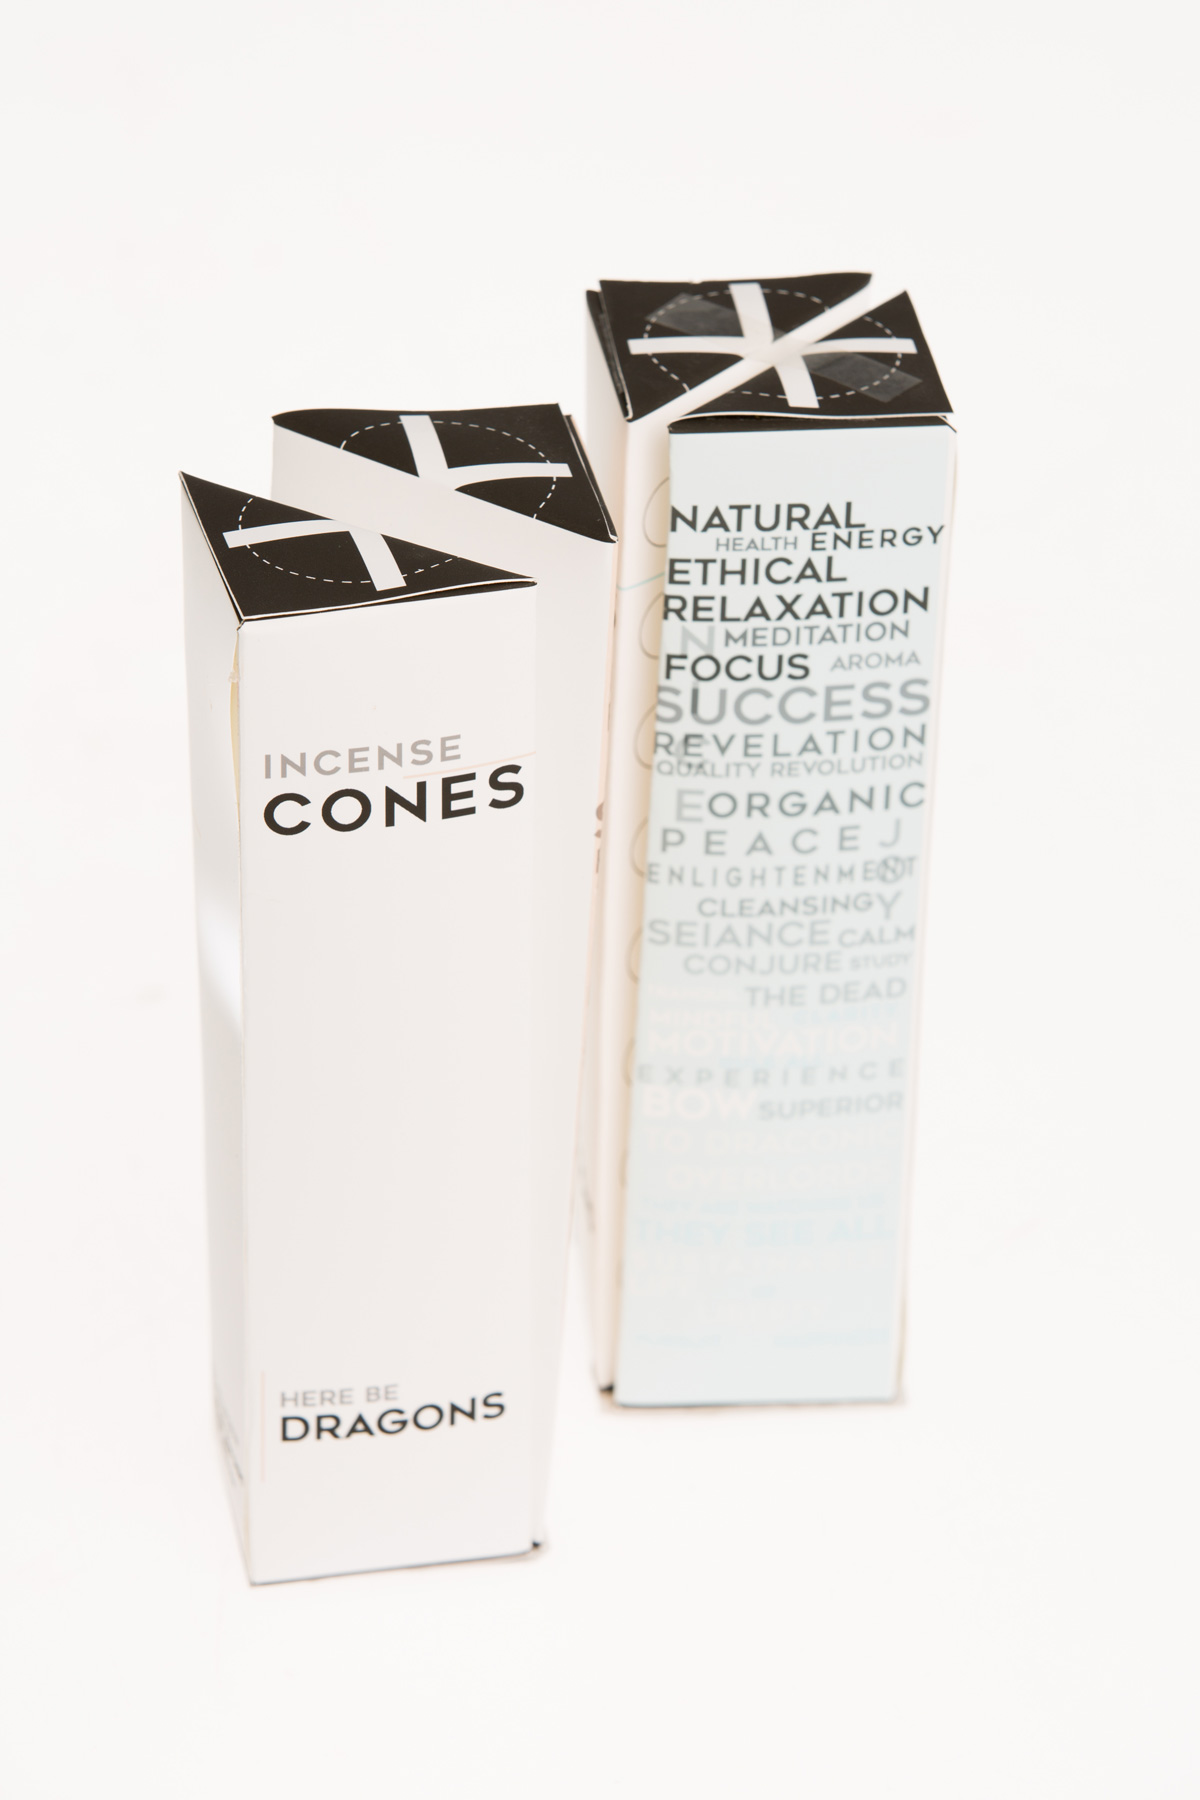 Here be Dragons Incense Cones